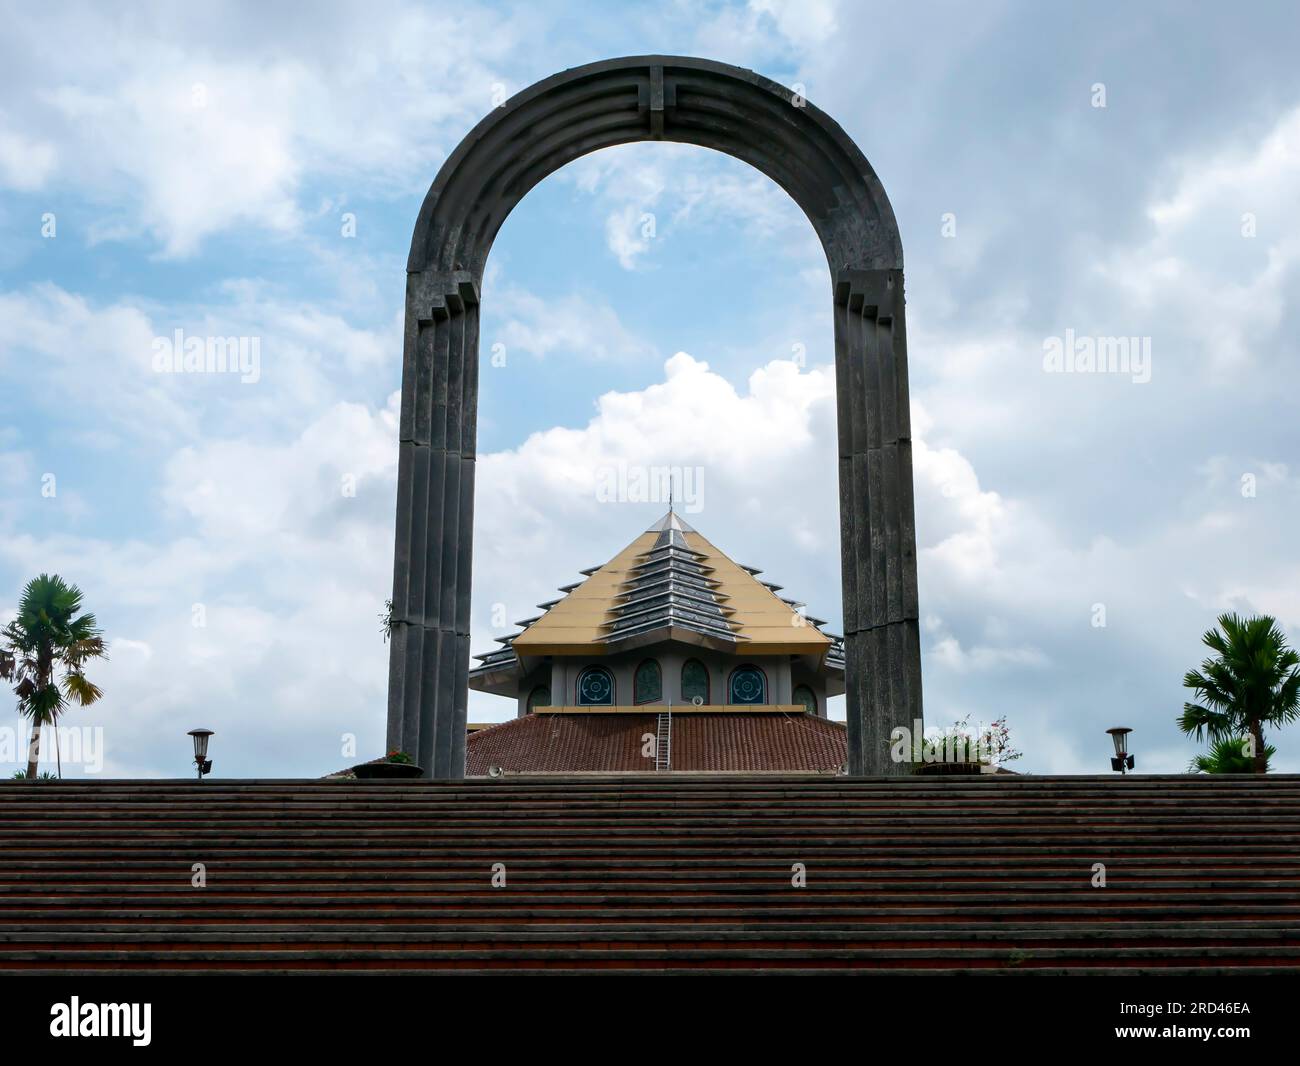 The main gate of Masjid Kampus UGM, a mosque in the Gadjah Mada University campus complex in Yogyakarta, Indonesia Stock Photo